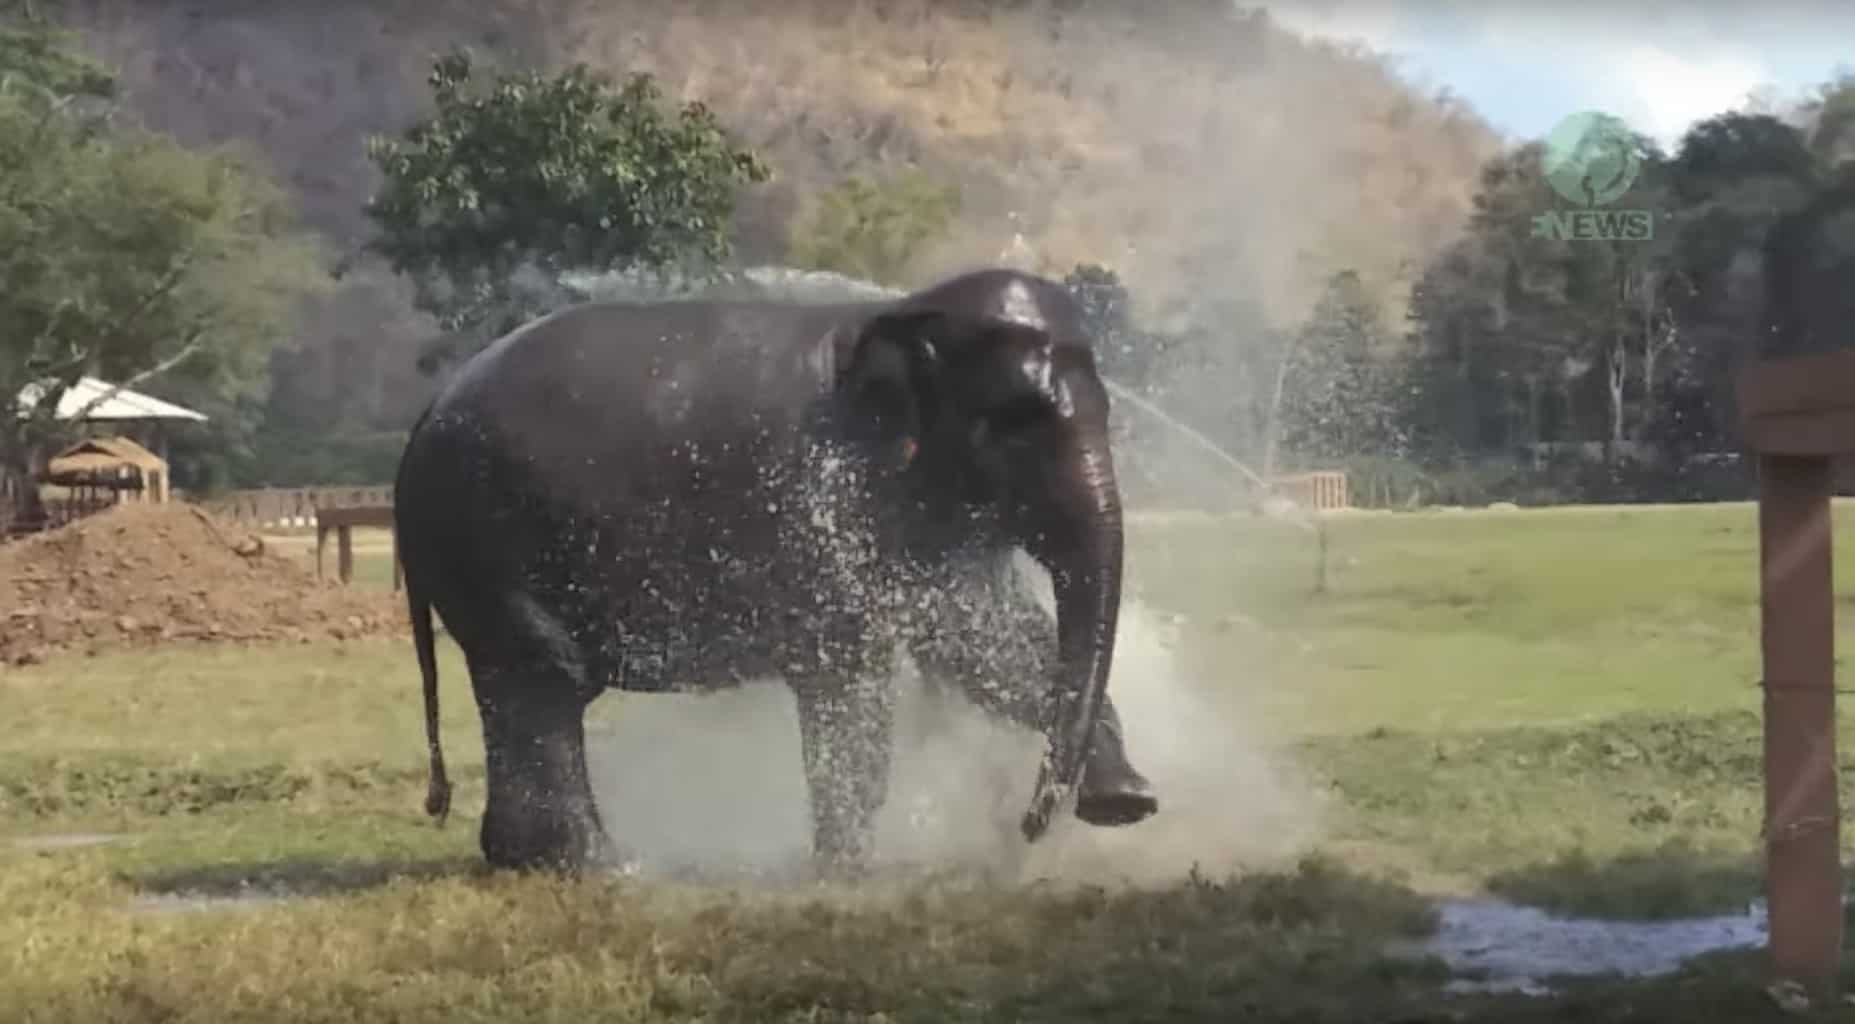 Elephant Playing With water sprinkler